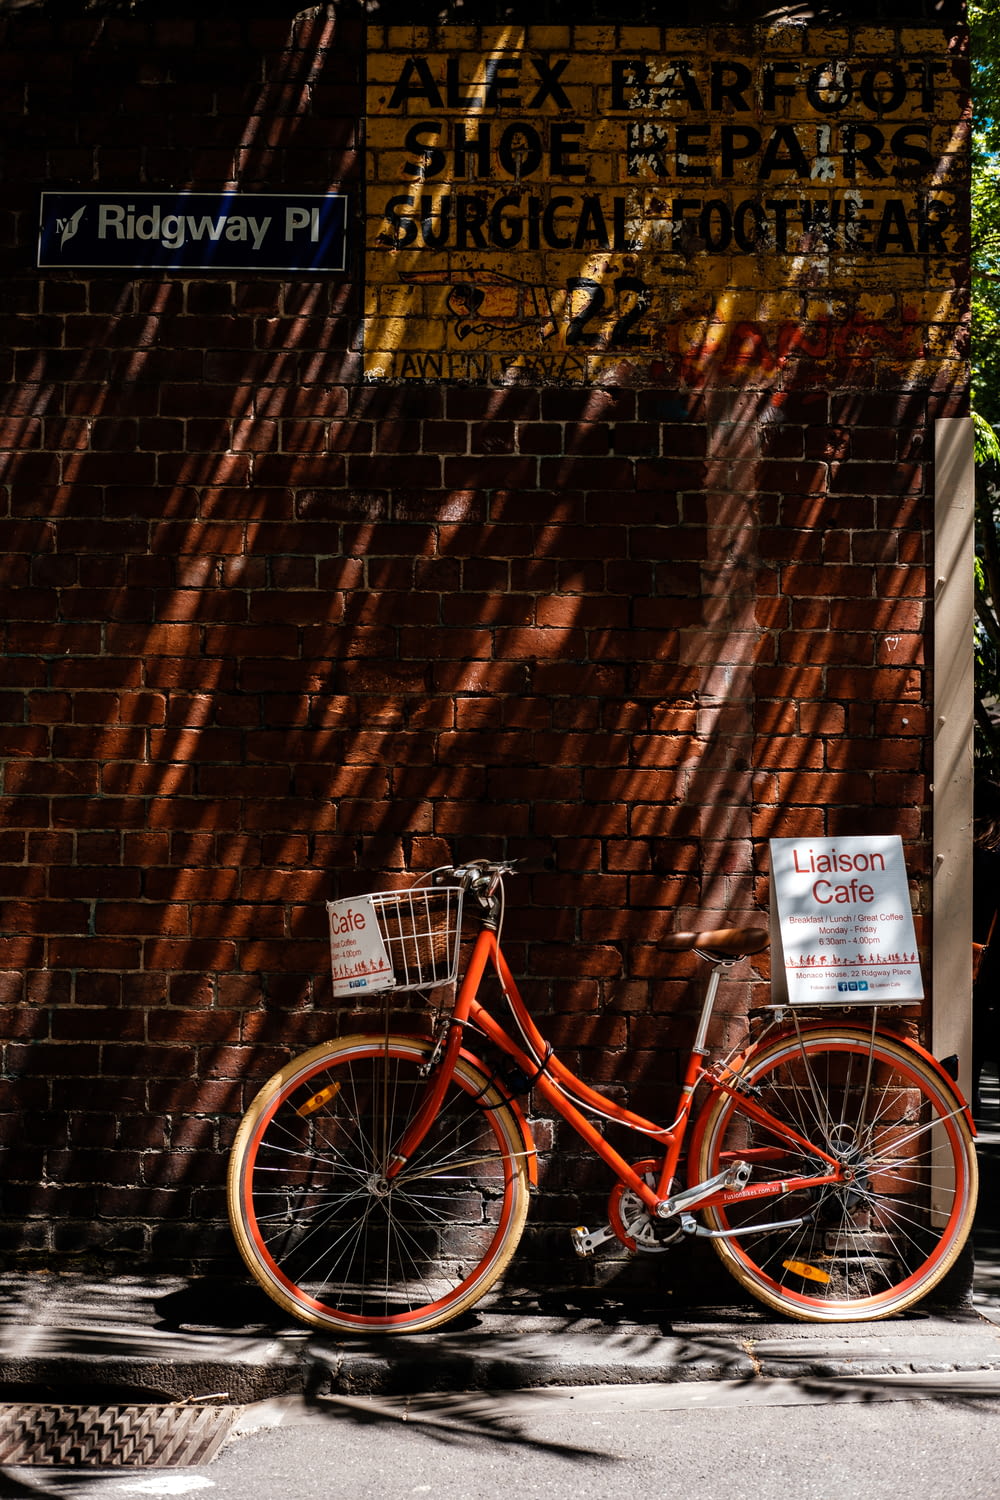 a bicycle parked next to a brick wall